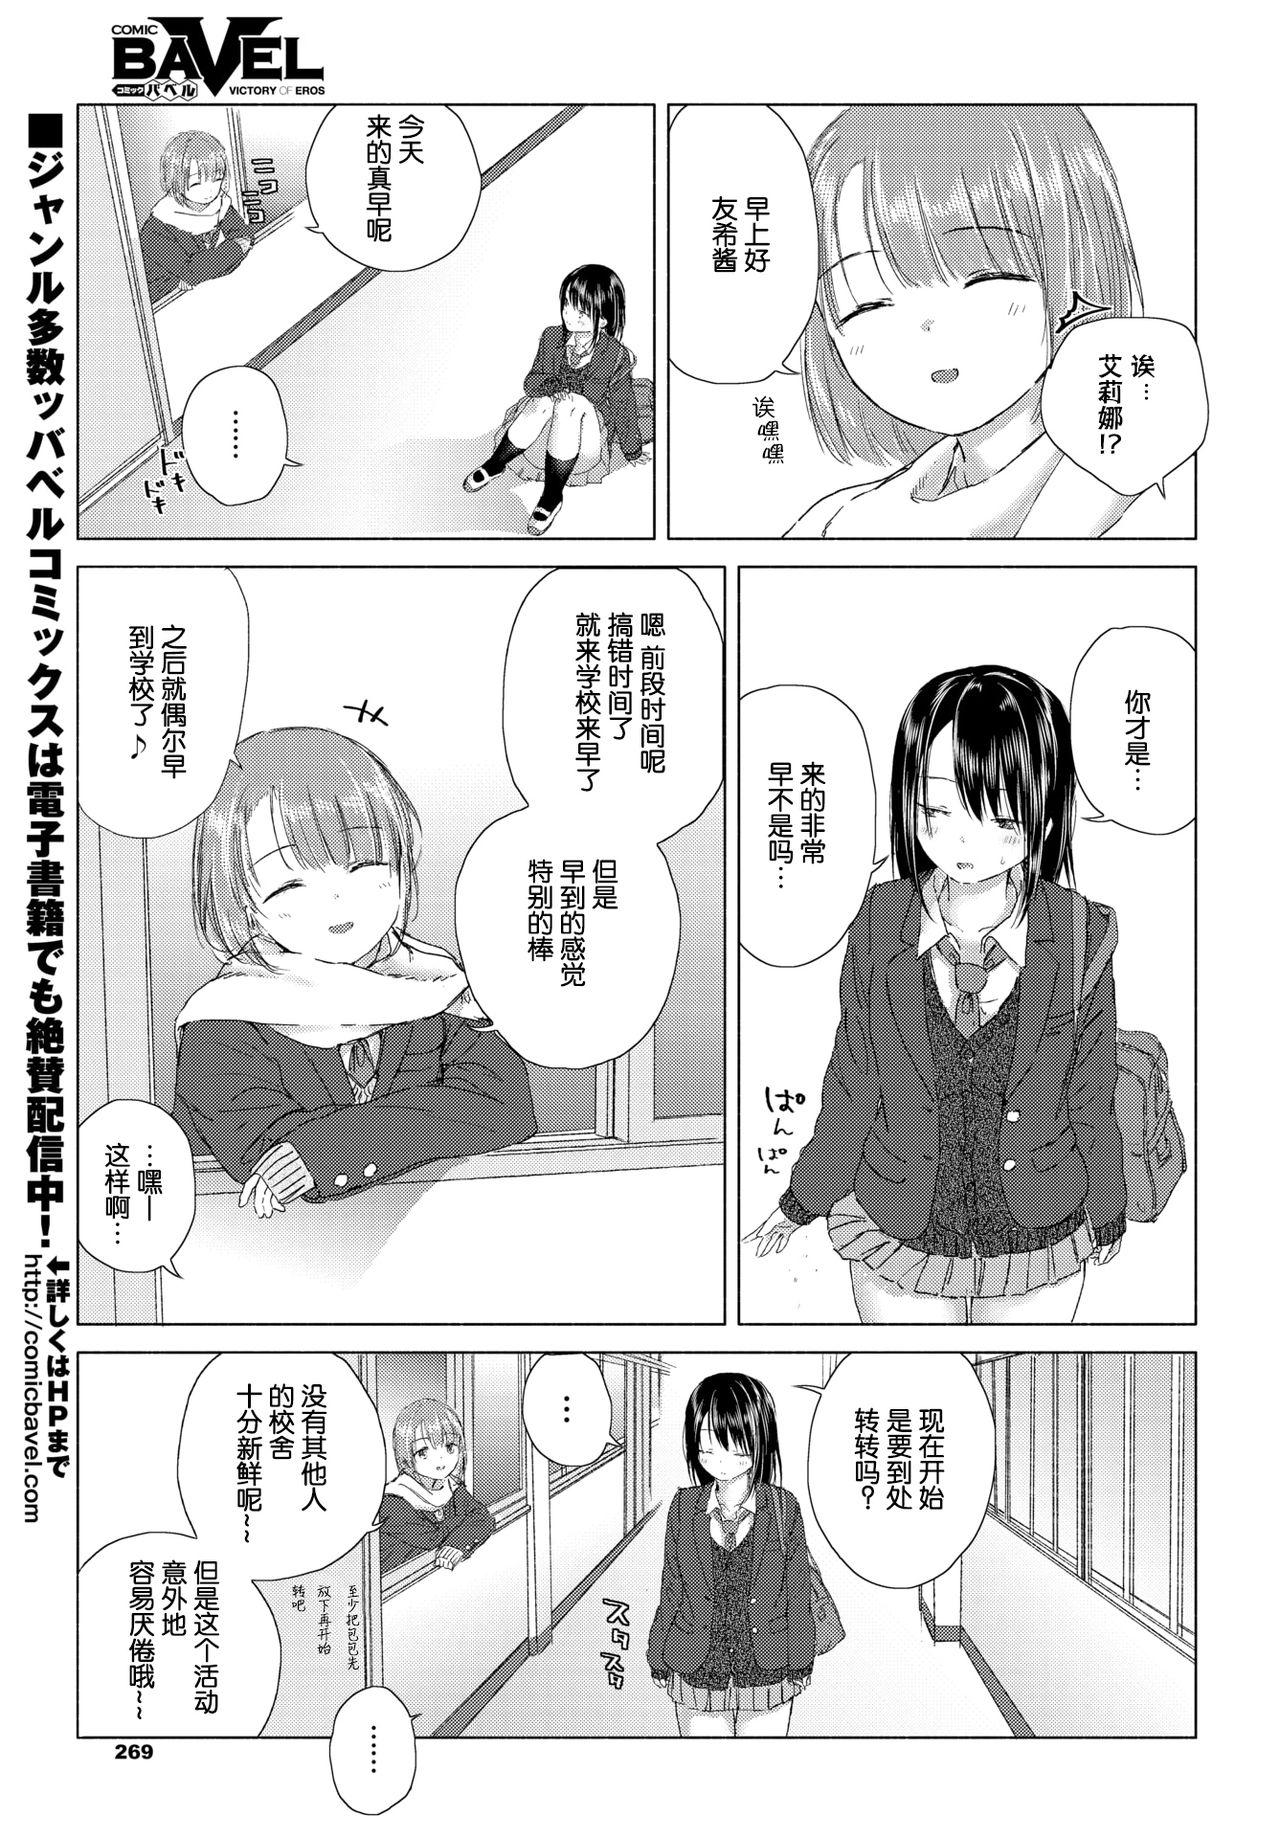 Wet Cunt Shiawase no Kakushi Basho - Hiding place for happiness Bedroom - Page 6